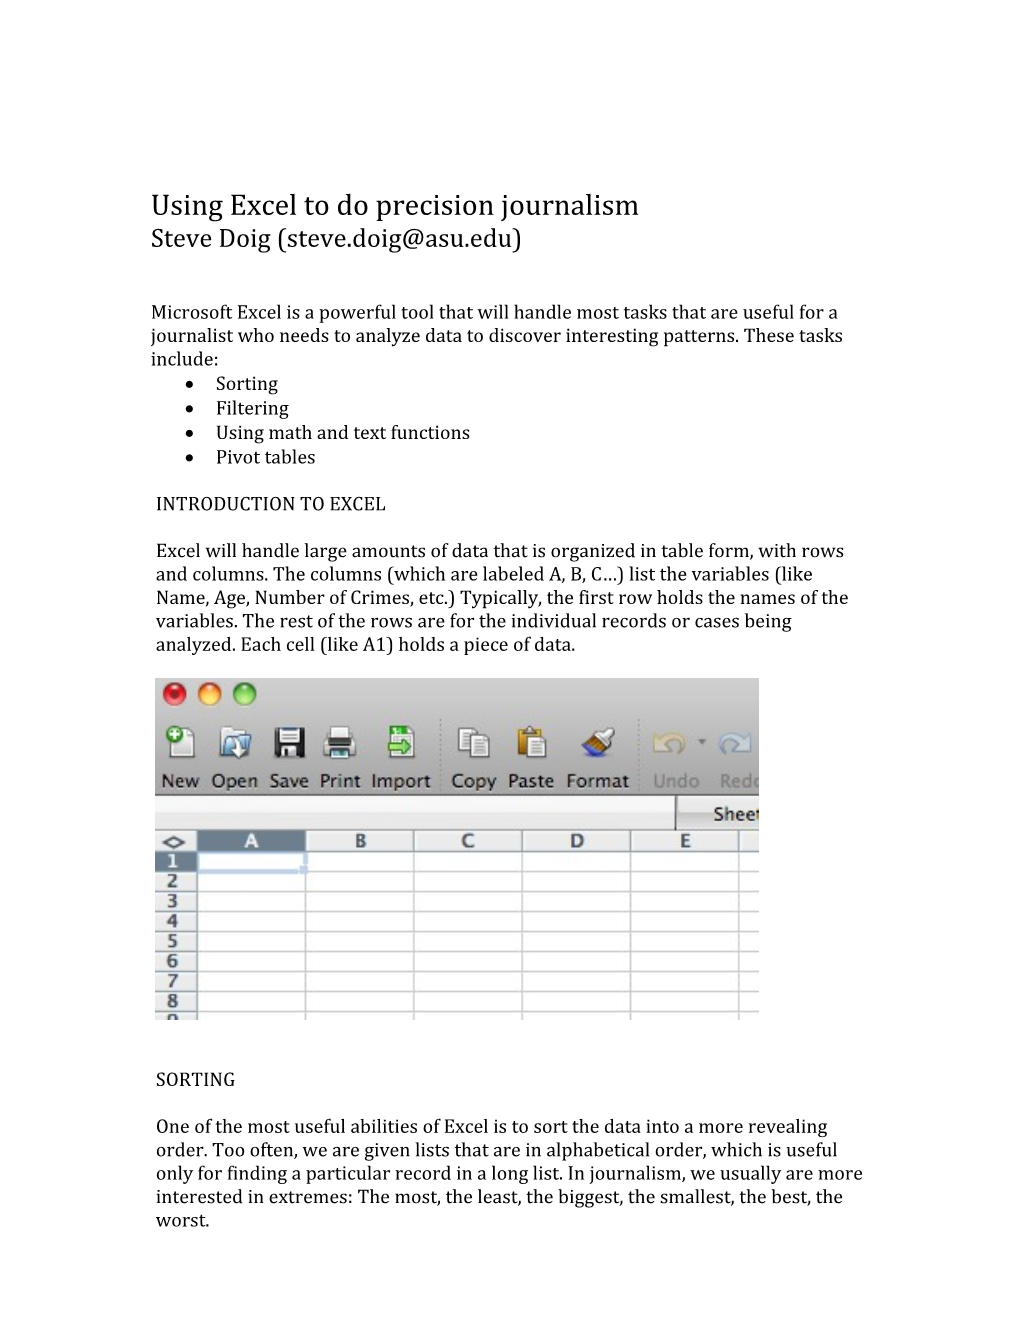 Using Excel to Do Precision Journalism